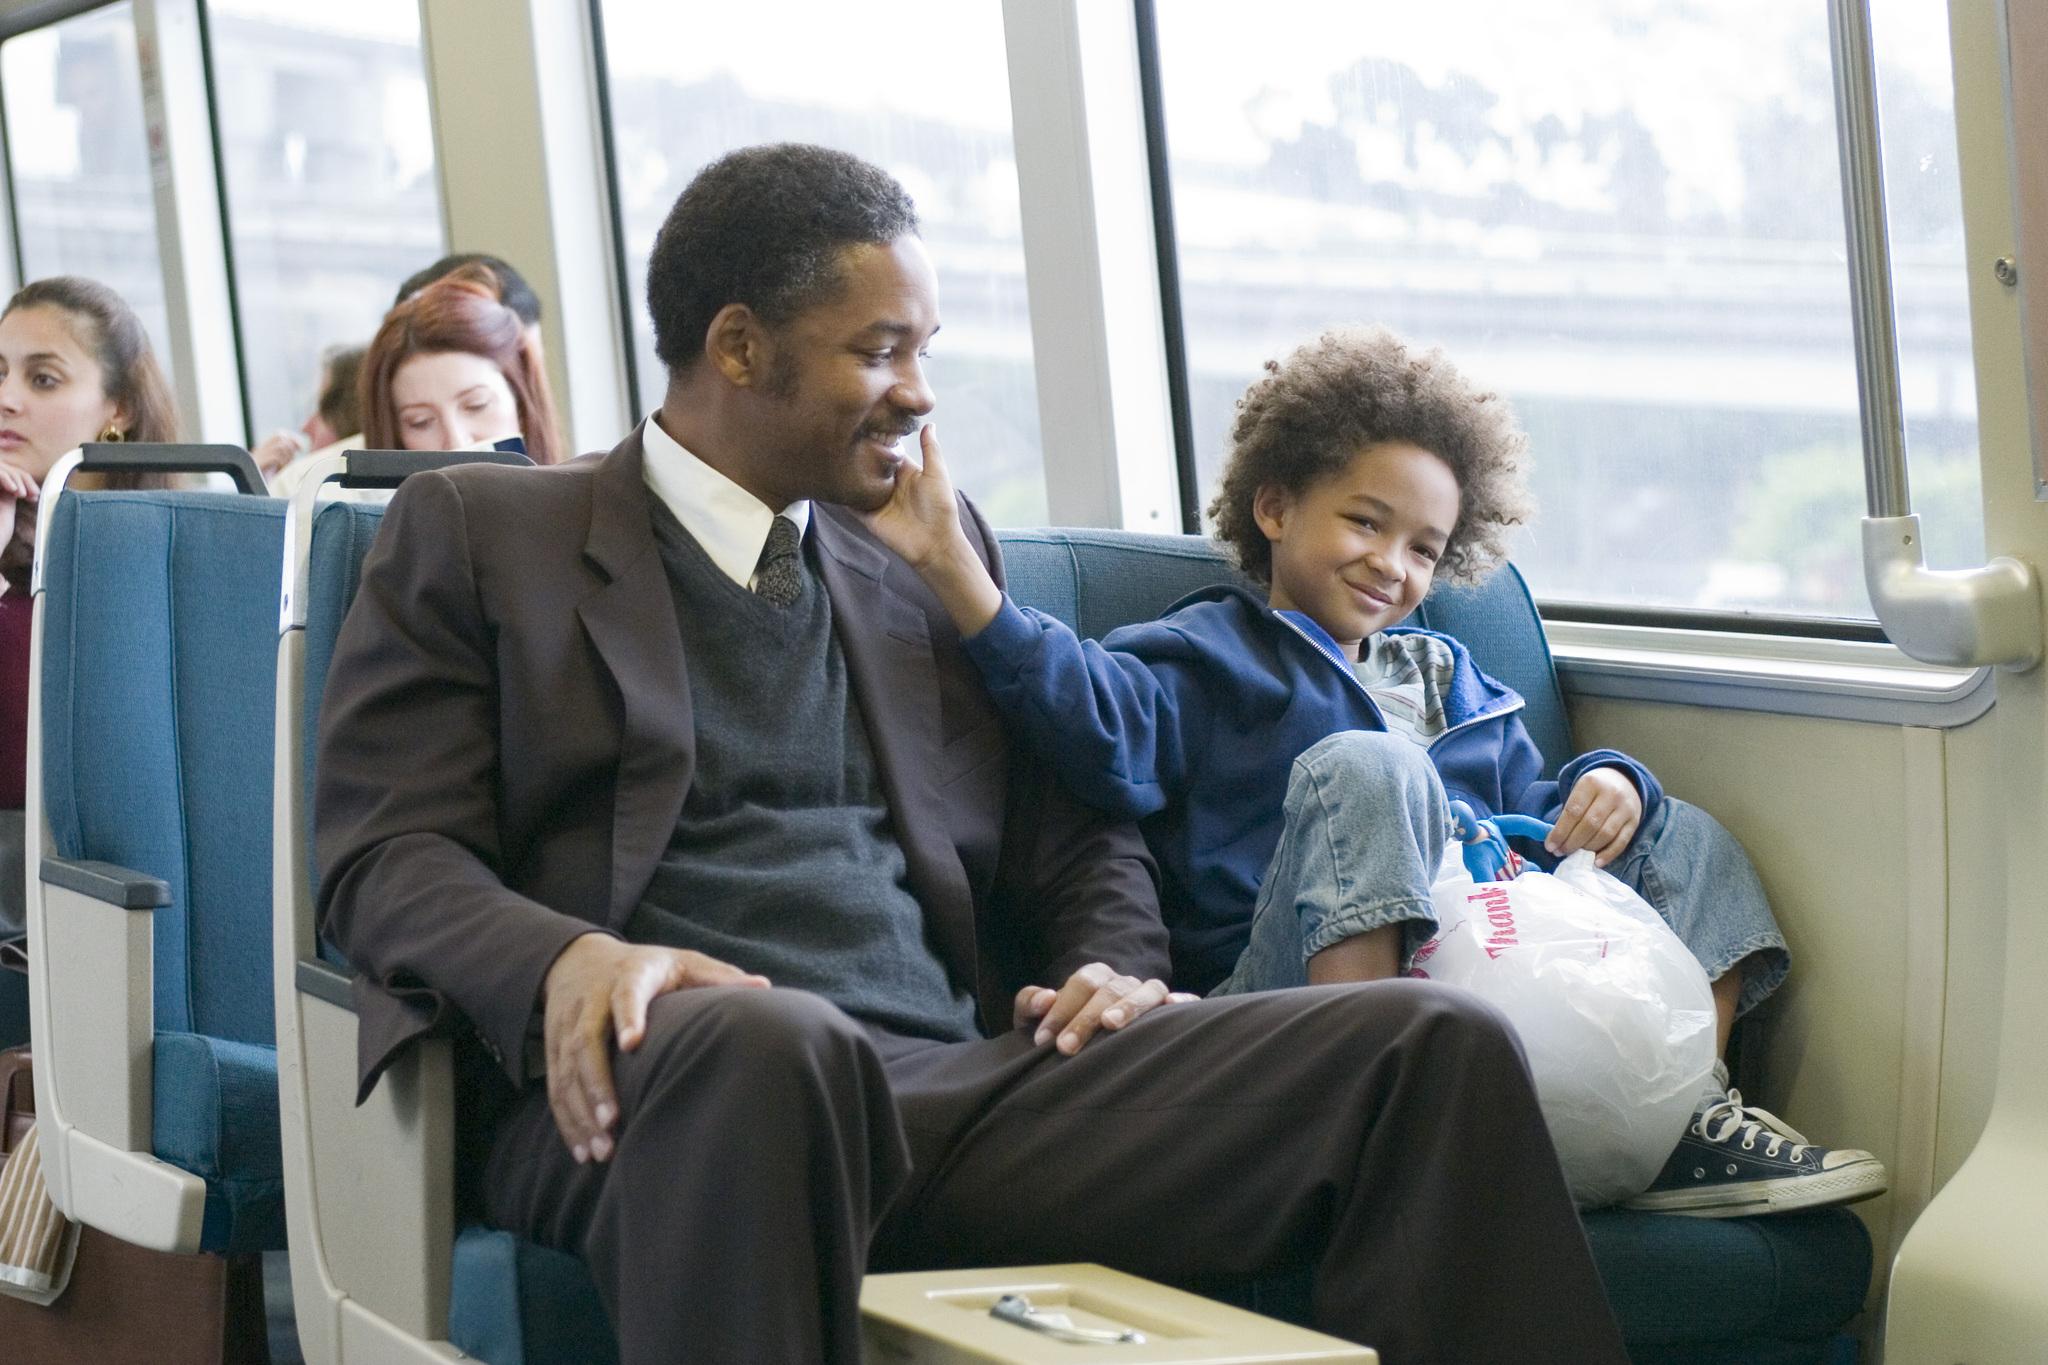 Will Smith in The Pursuit of Happyness